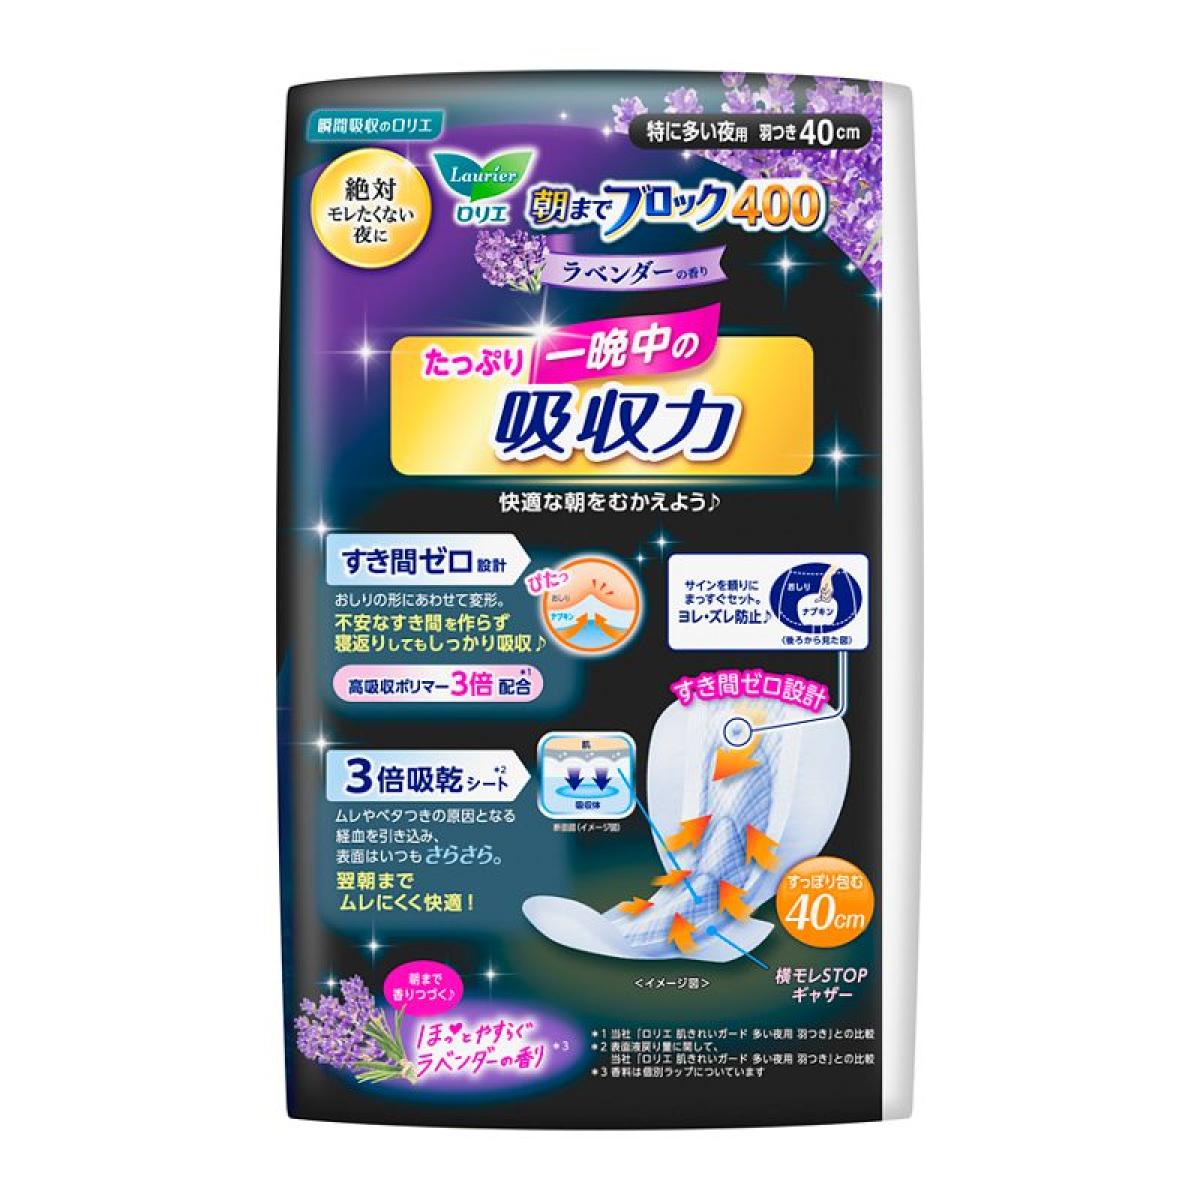 Kao Laurier Sanitary Night Pads 40cm - 10 sheets Lavender fragrance